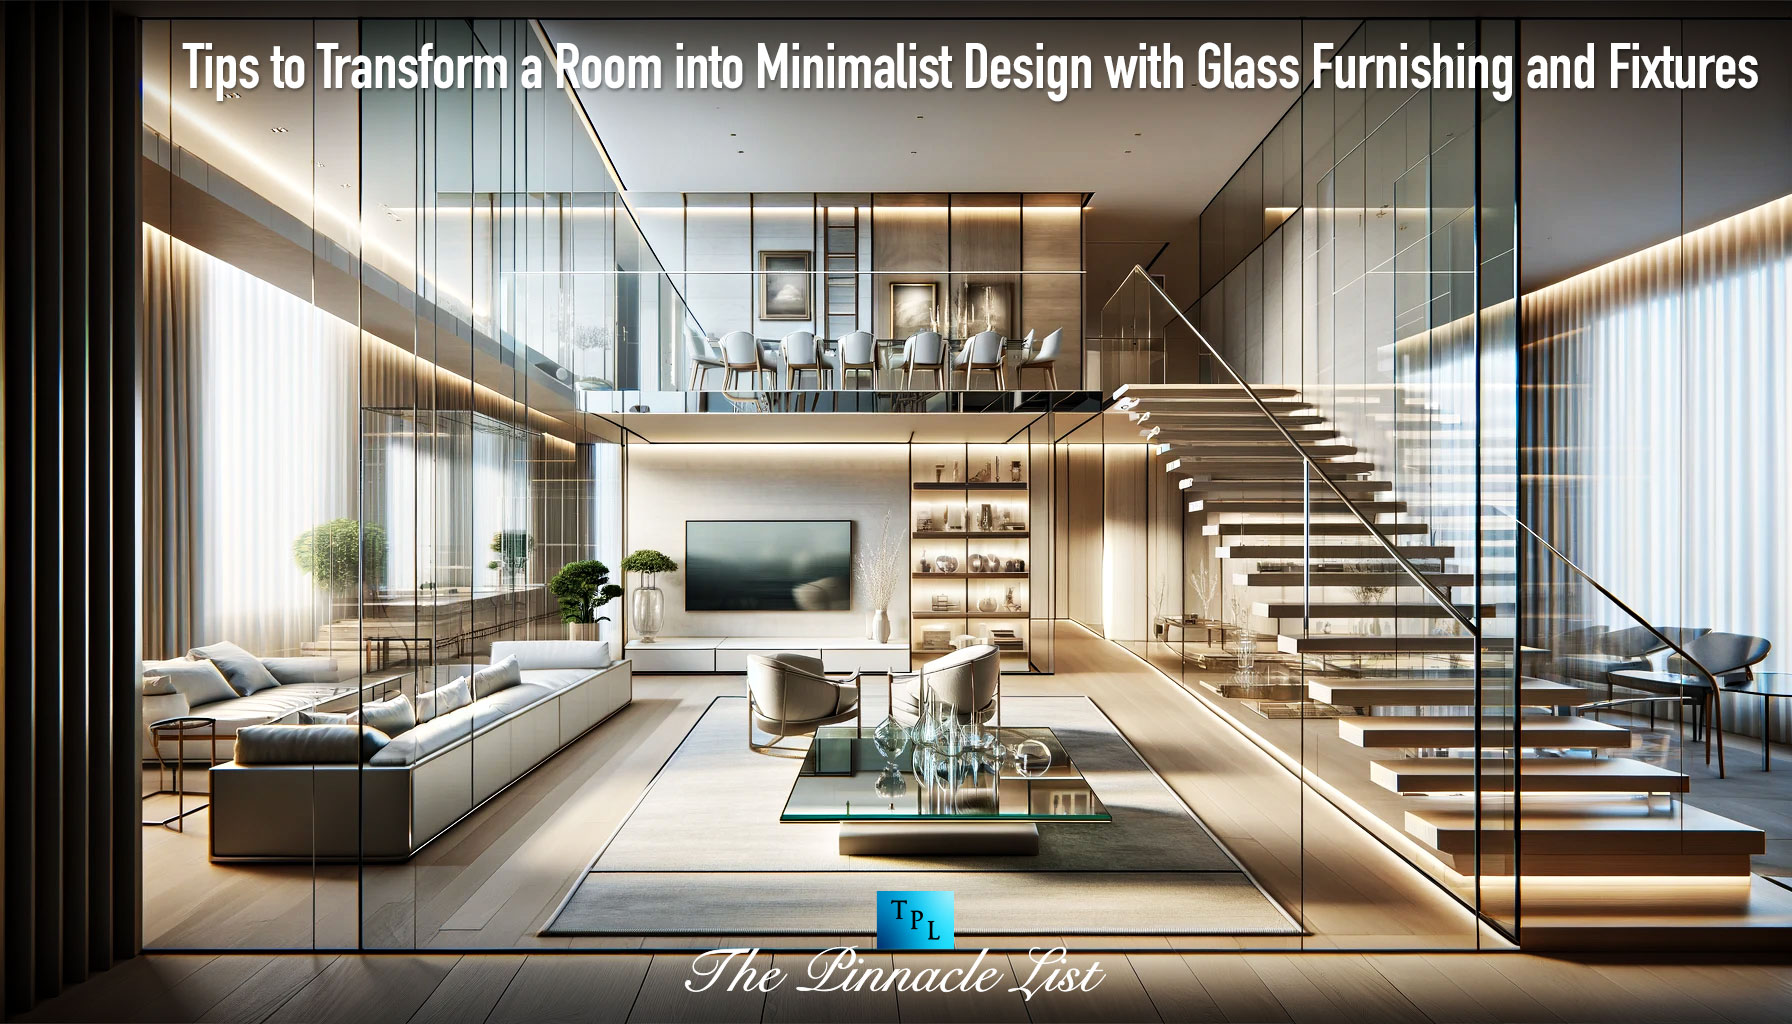 Tips to Transform a Room into Minimalist Design with Glass Furnishing and Fixtures